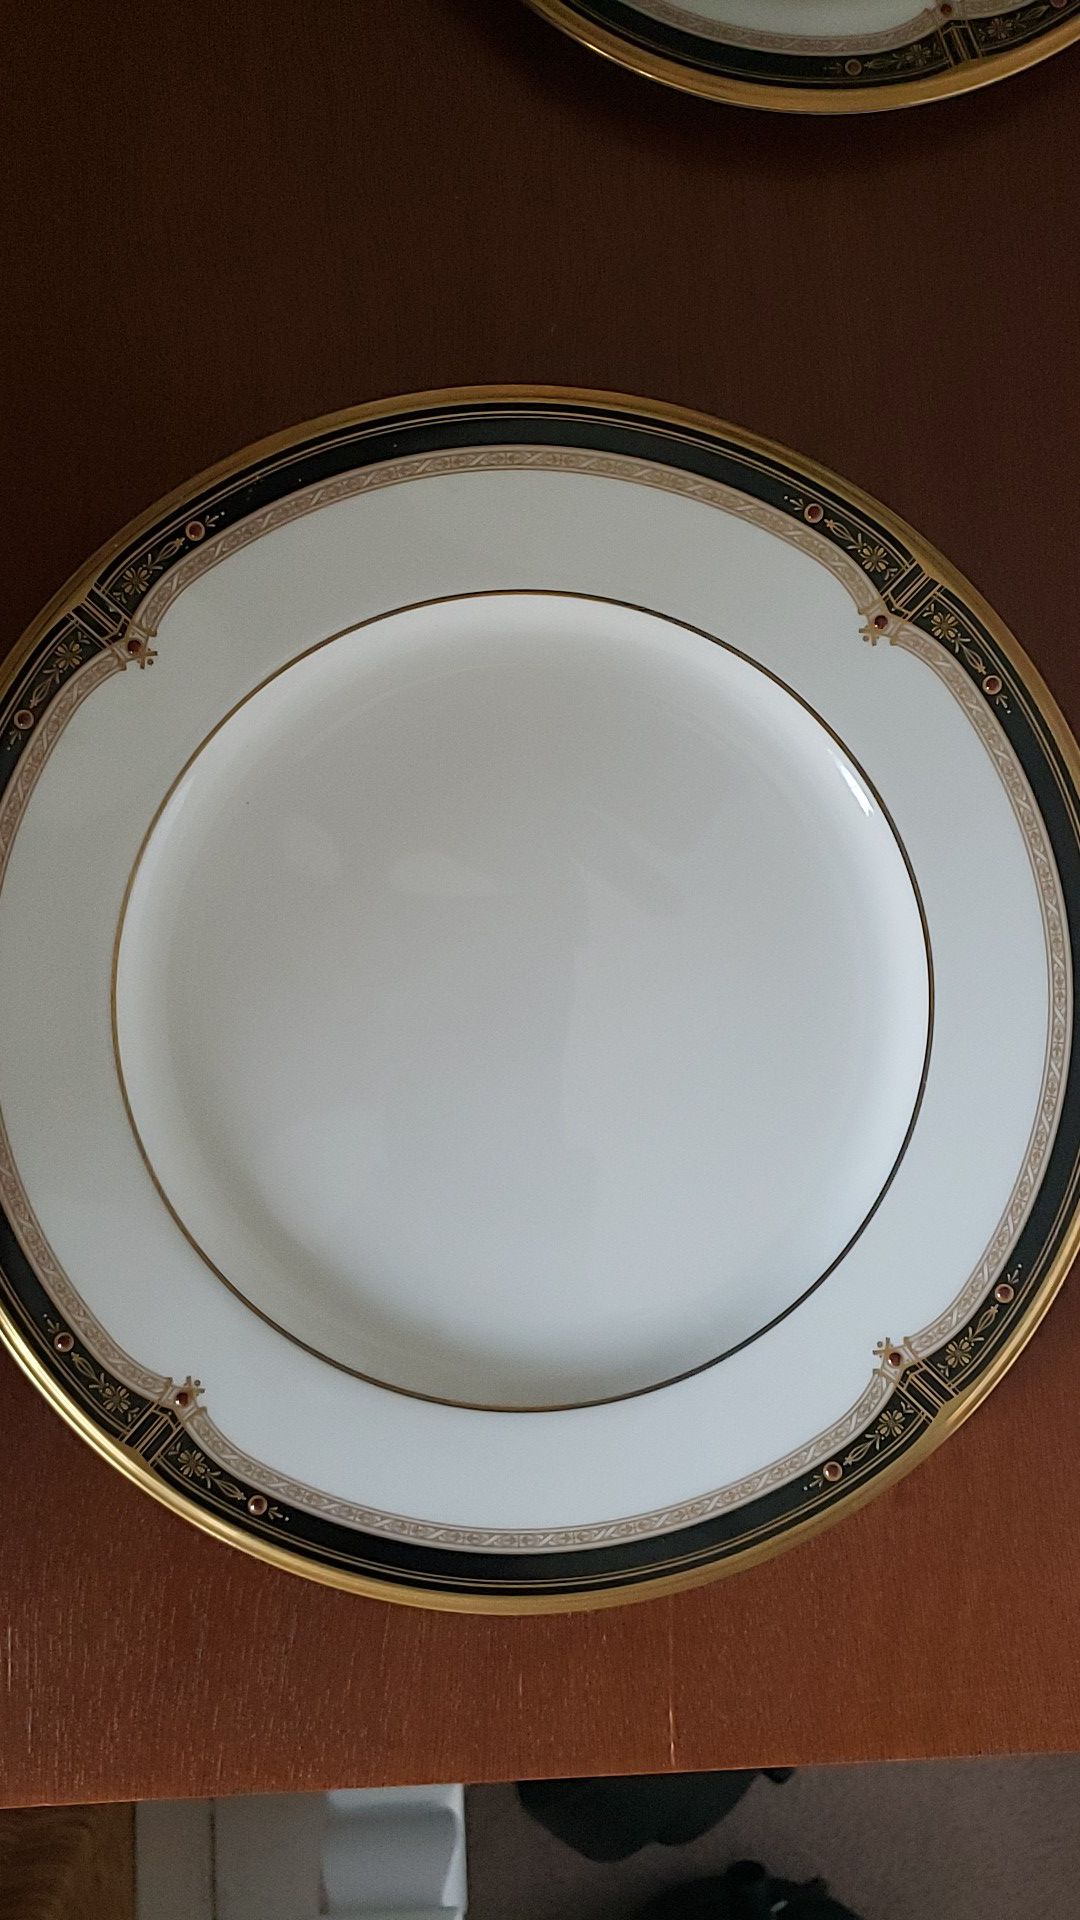 Noratake - Dinner plate - Gold and Sable